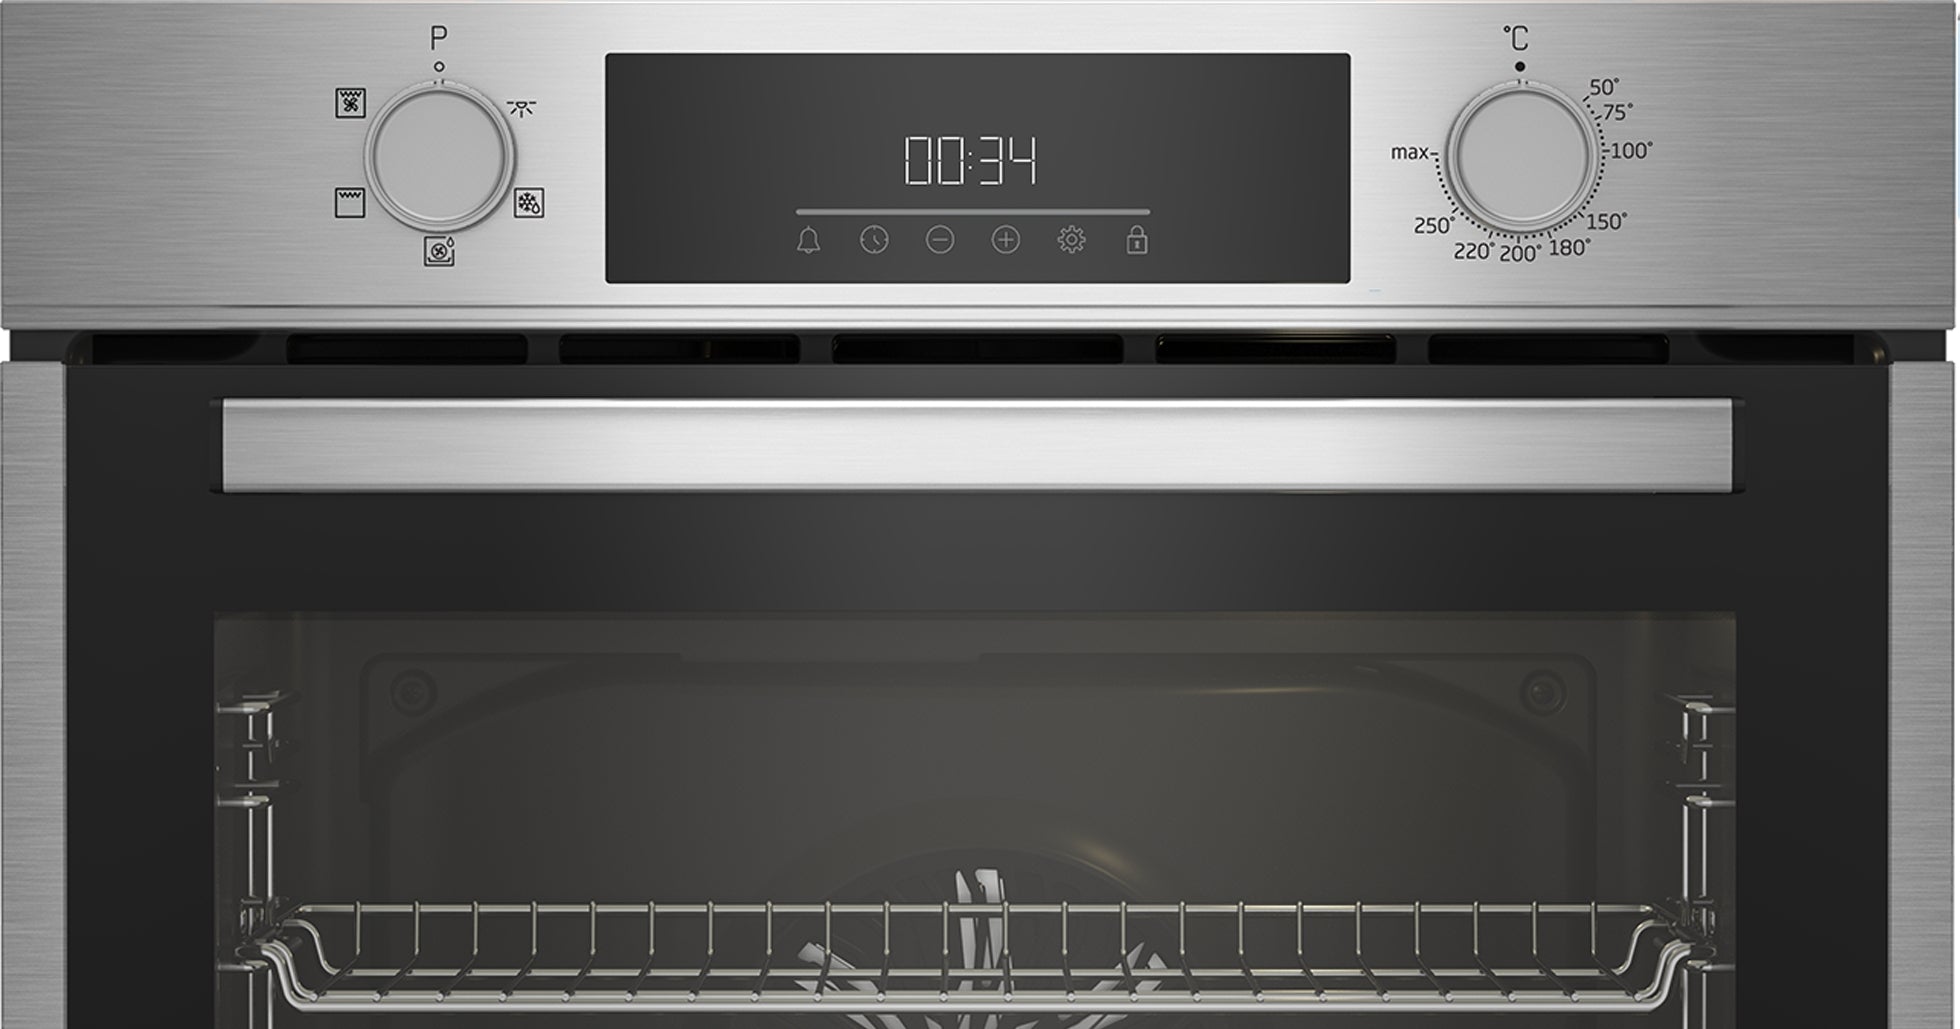 Beko BBIF16300X 60cm Built-In Oven with AeroPerfect,Touch Control in Stainless Steel Finish